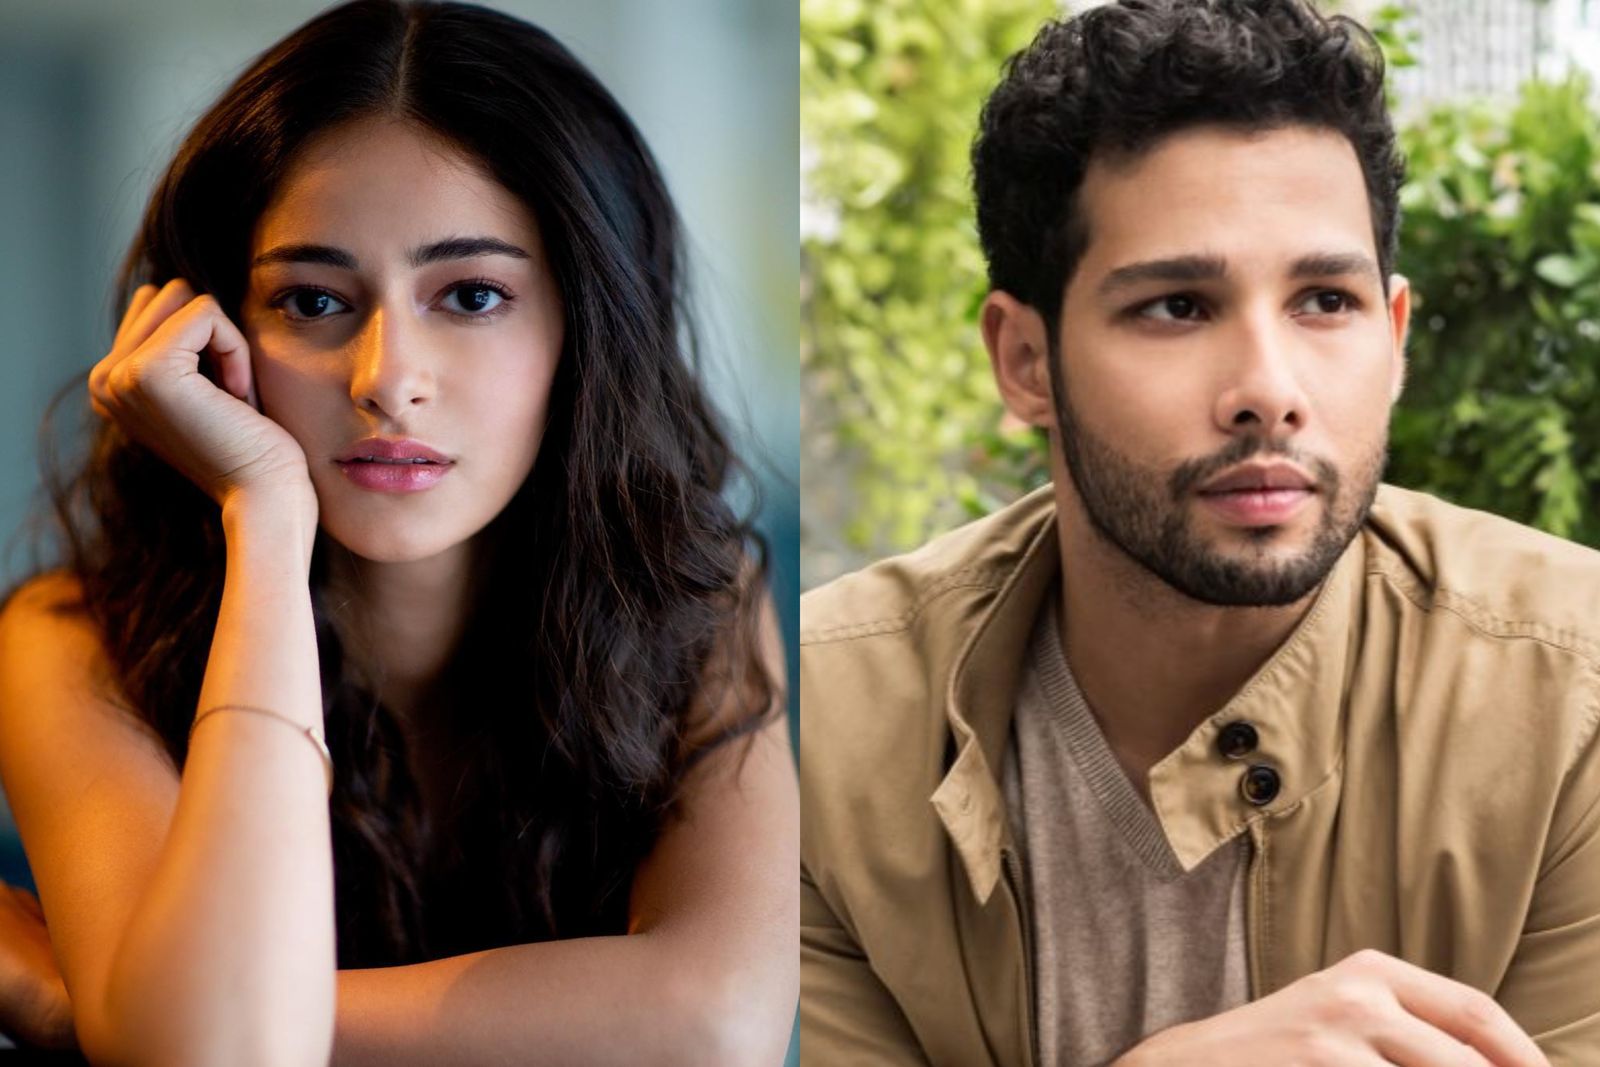 Siddhant Chaturvedi Is More Conscious Of What He Says After ‘Neptotism’ Controversy With Ananya Panday